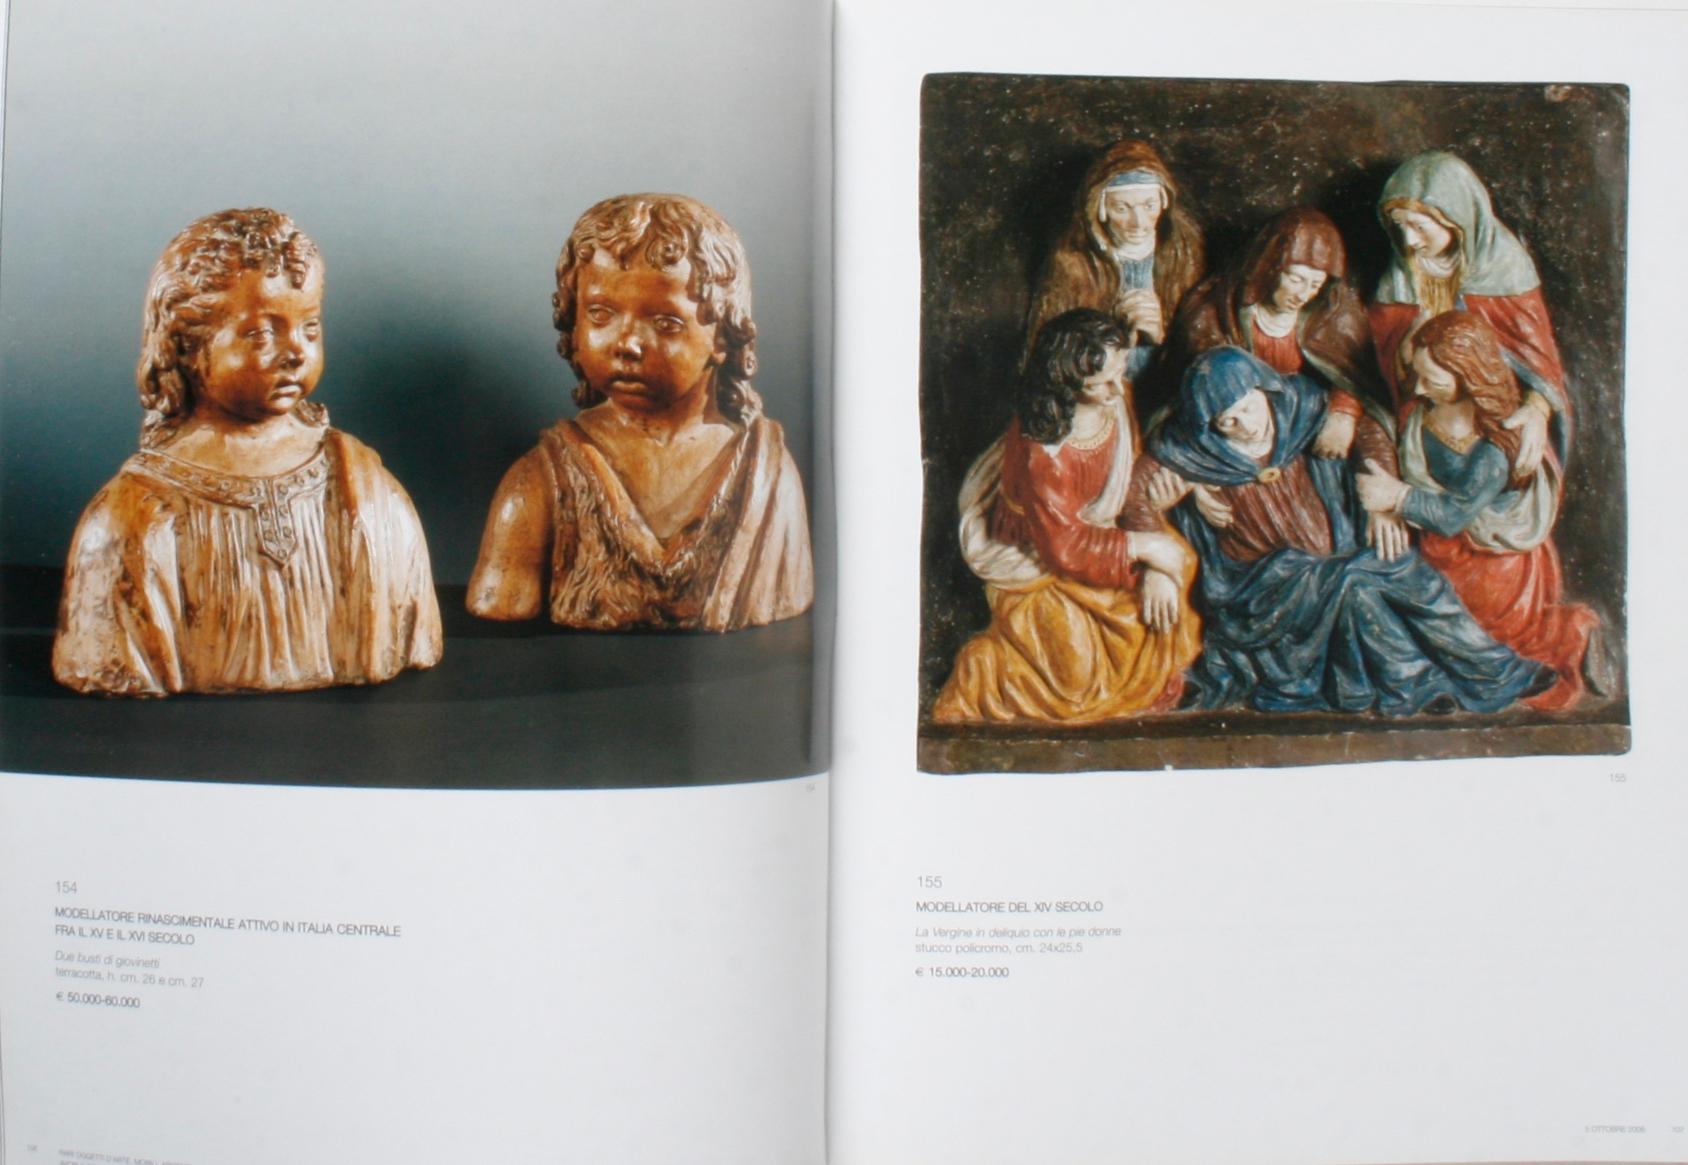 Auction Catalogue of Italian Fine Art, Silver, Ivory, and Venetian Objects, 2006 For Sale 6